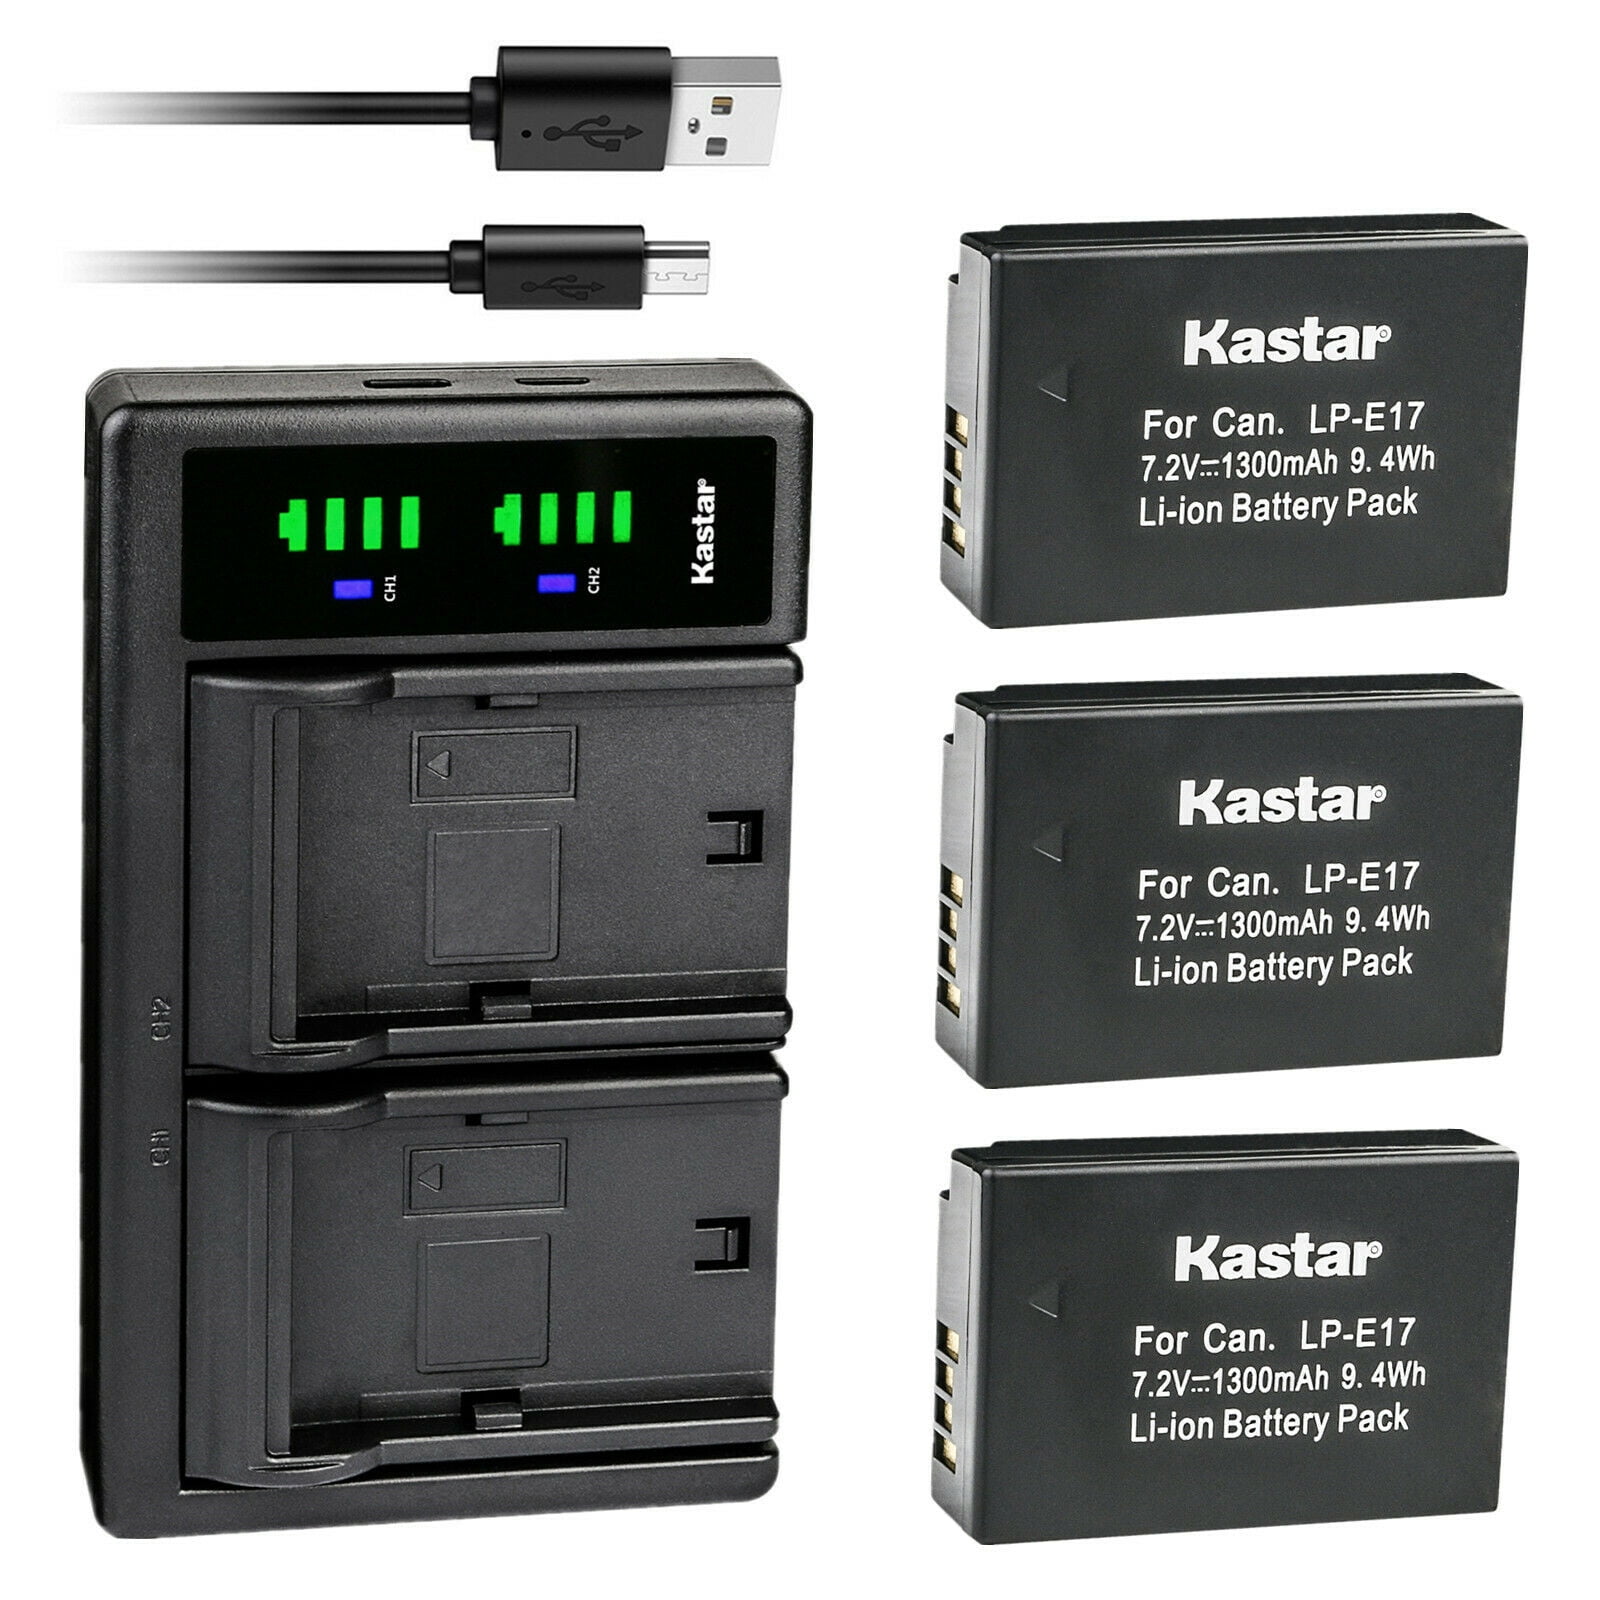 Canon EOS 200D EOS750D Canon BG-E18 IR Battery Grip LC-E17E Charger Kastar 1-Pack Battery and LTD2 USB Charger Replacement for Canon LP-E17 LPE17 9967B02 Battery EOS850D Camera Canon LC-E17